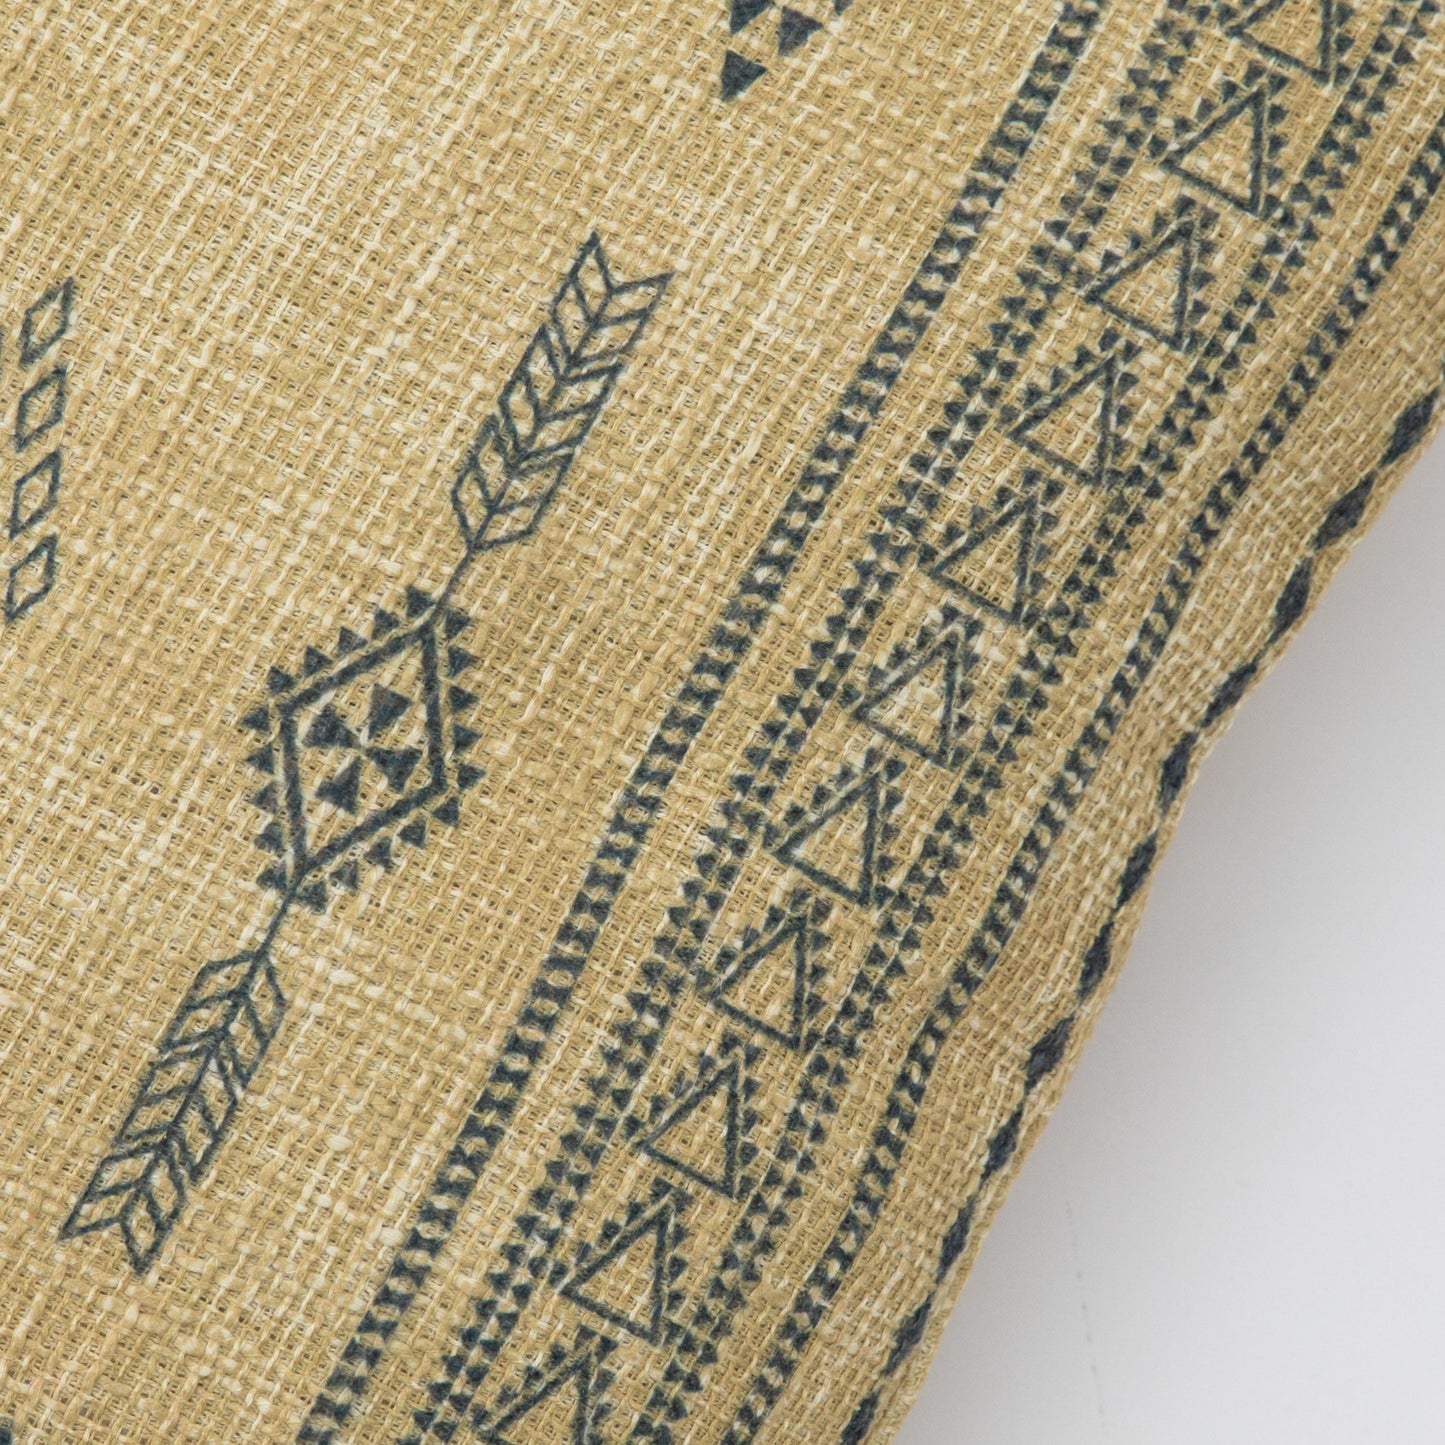 A close up of a tribal designed SG Aztec Print Cushion Cream 600x400mm pillow from Kikiathome.co.uk, perfect for interior decor.